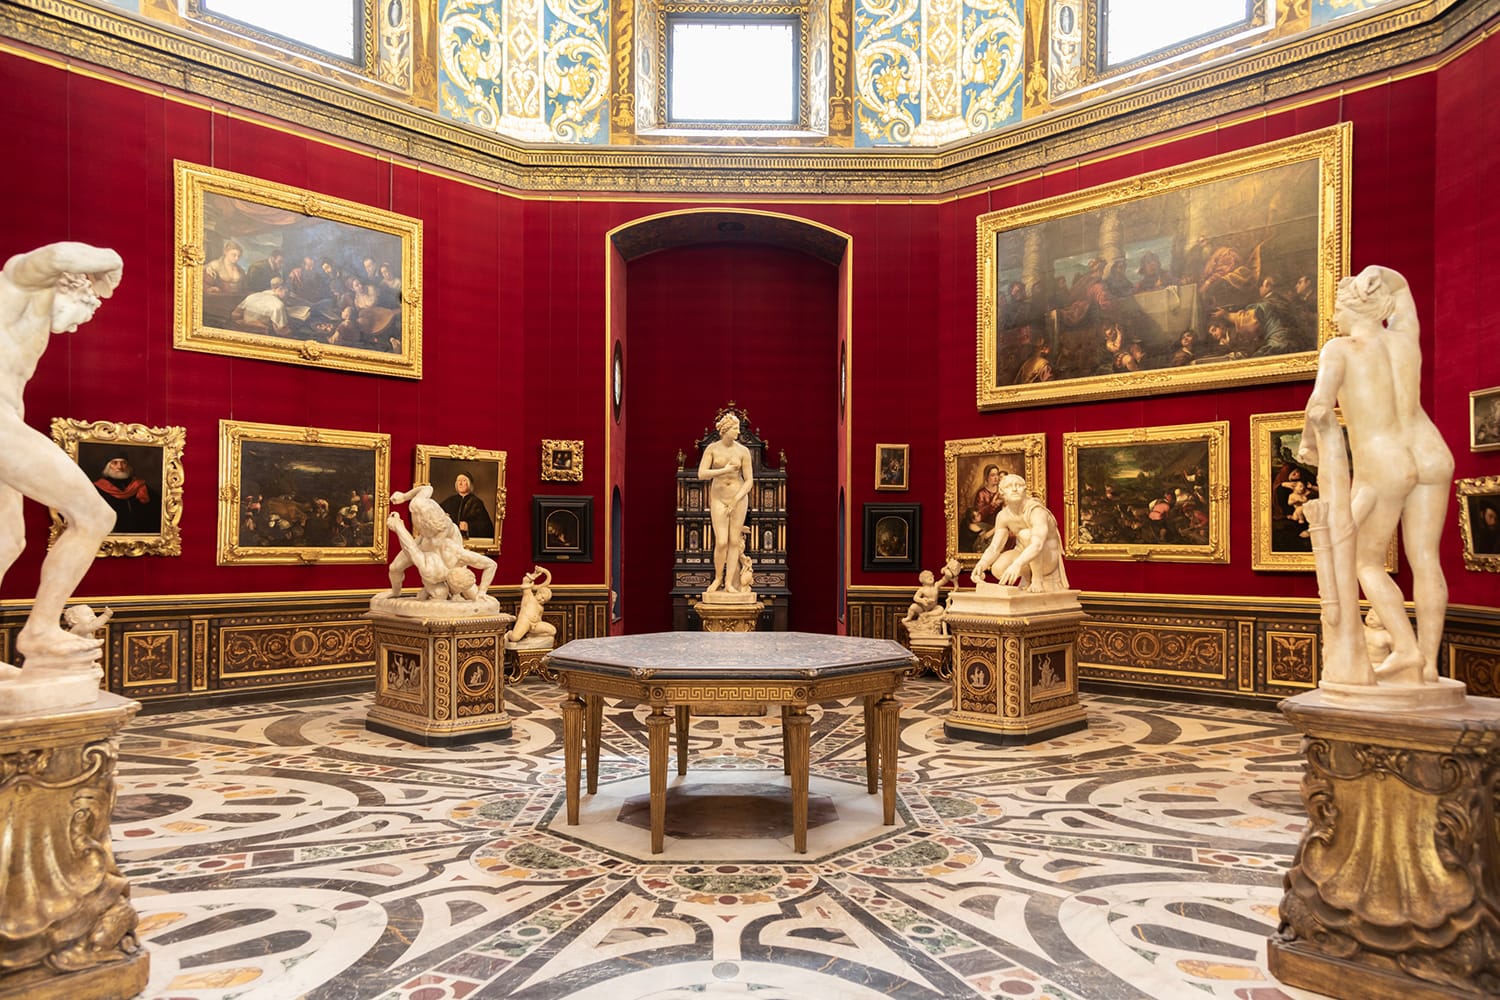 Tribuna room was the first nucleus of the Uffizi Gallery, Florence, Italy